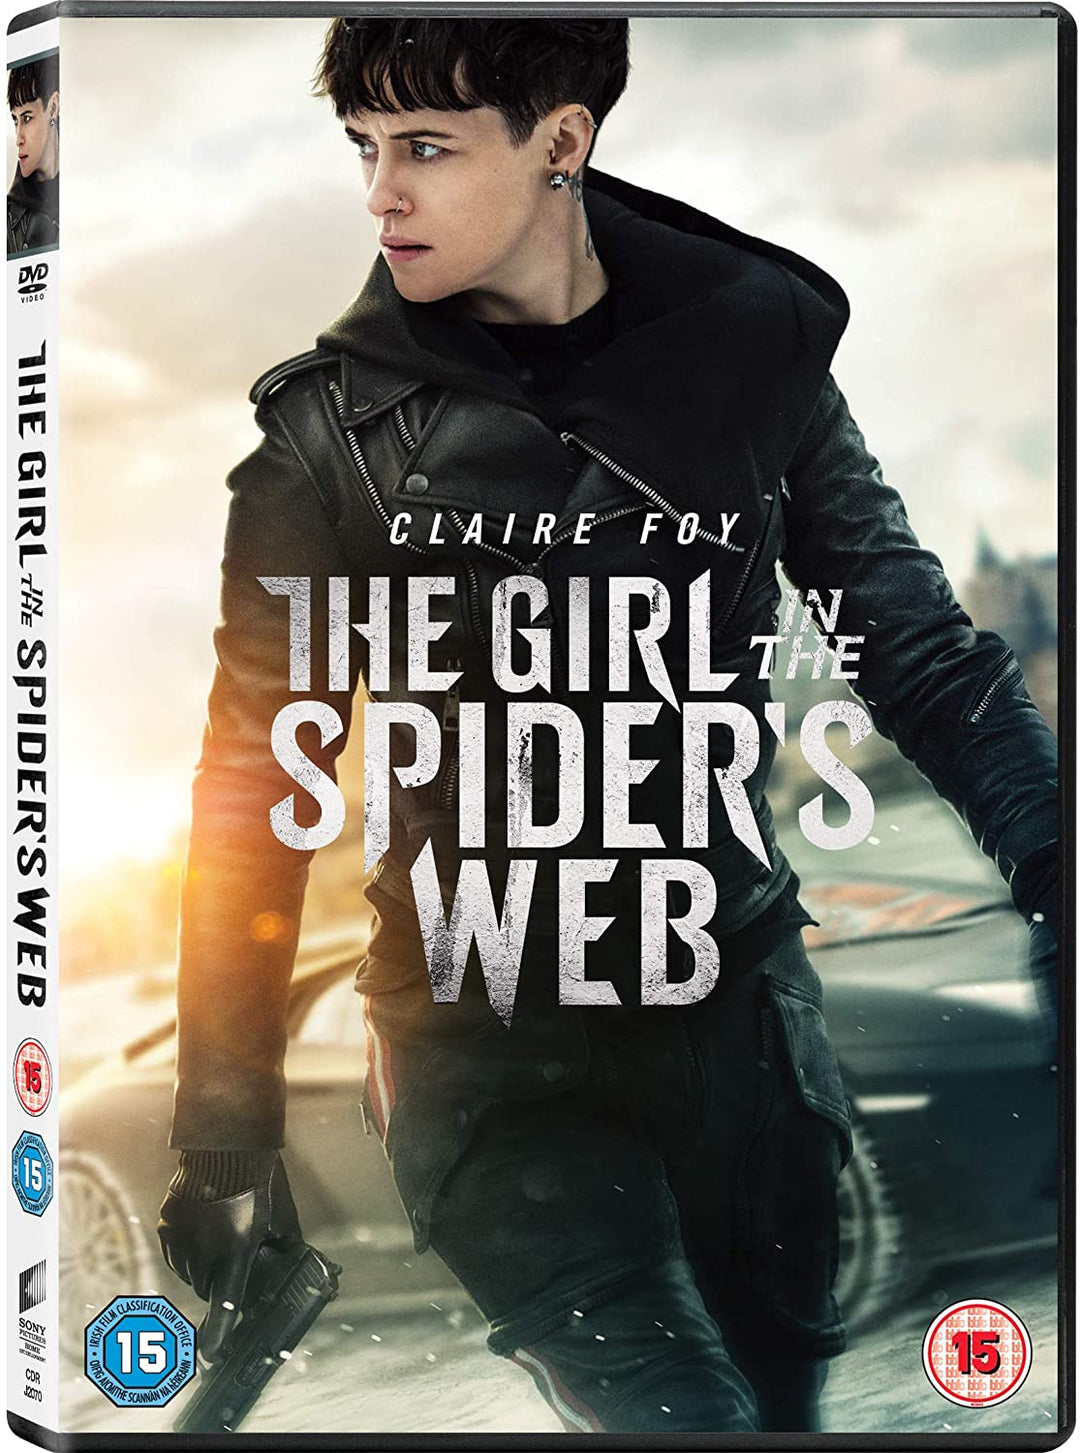 The Girl In The Spider's Web - Action/Thriller [DVD]